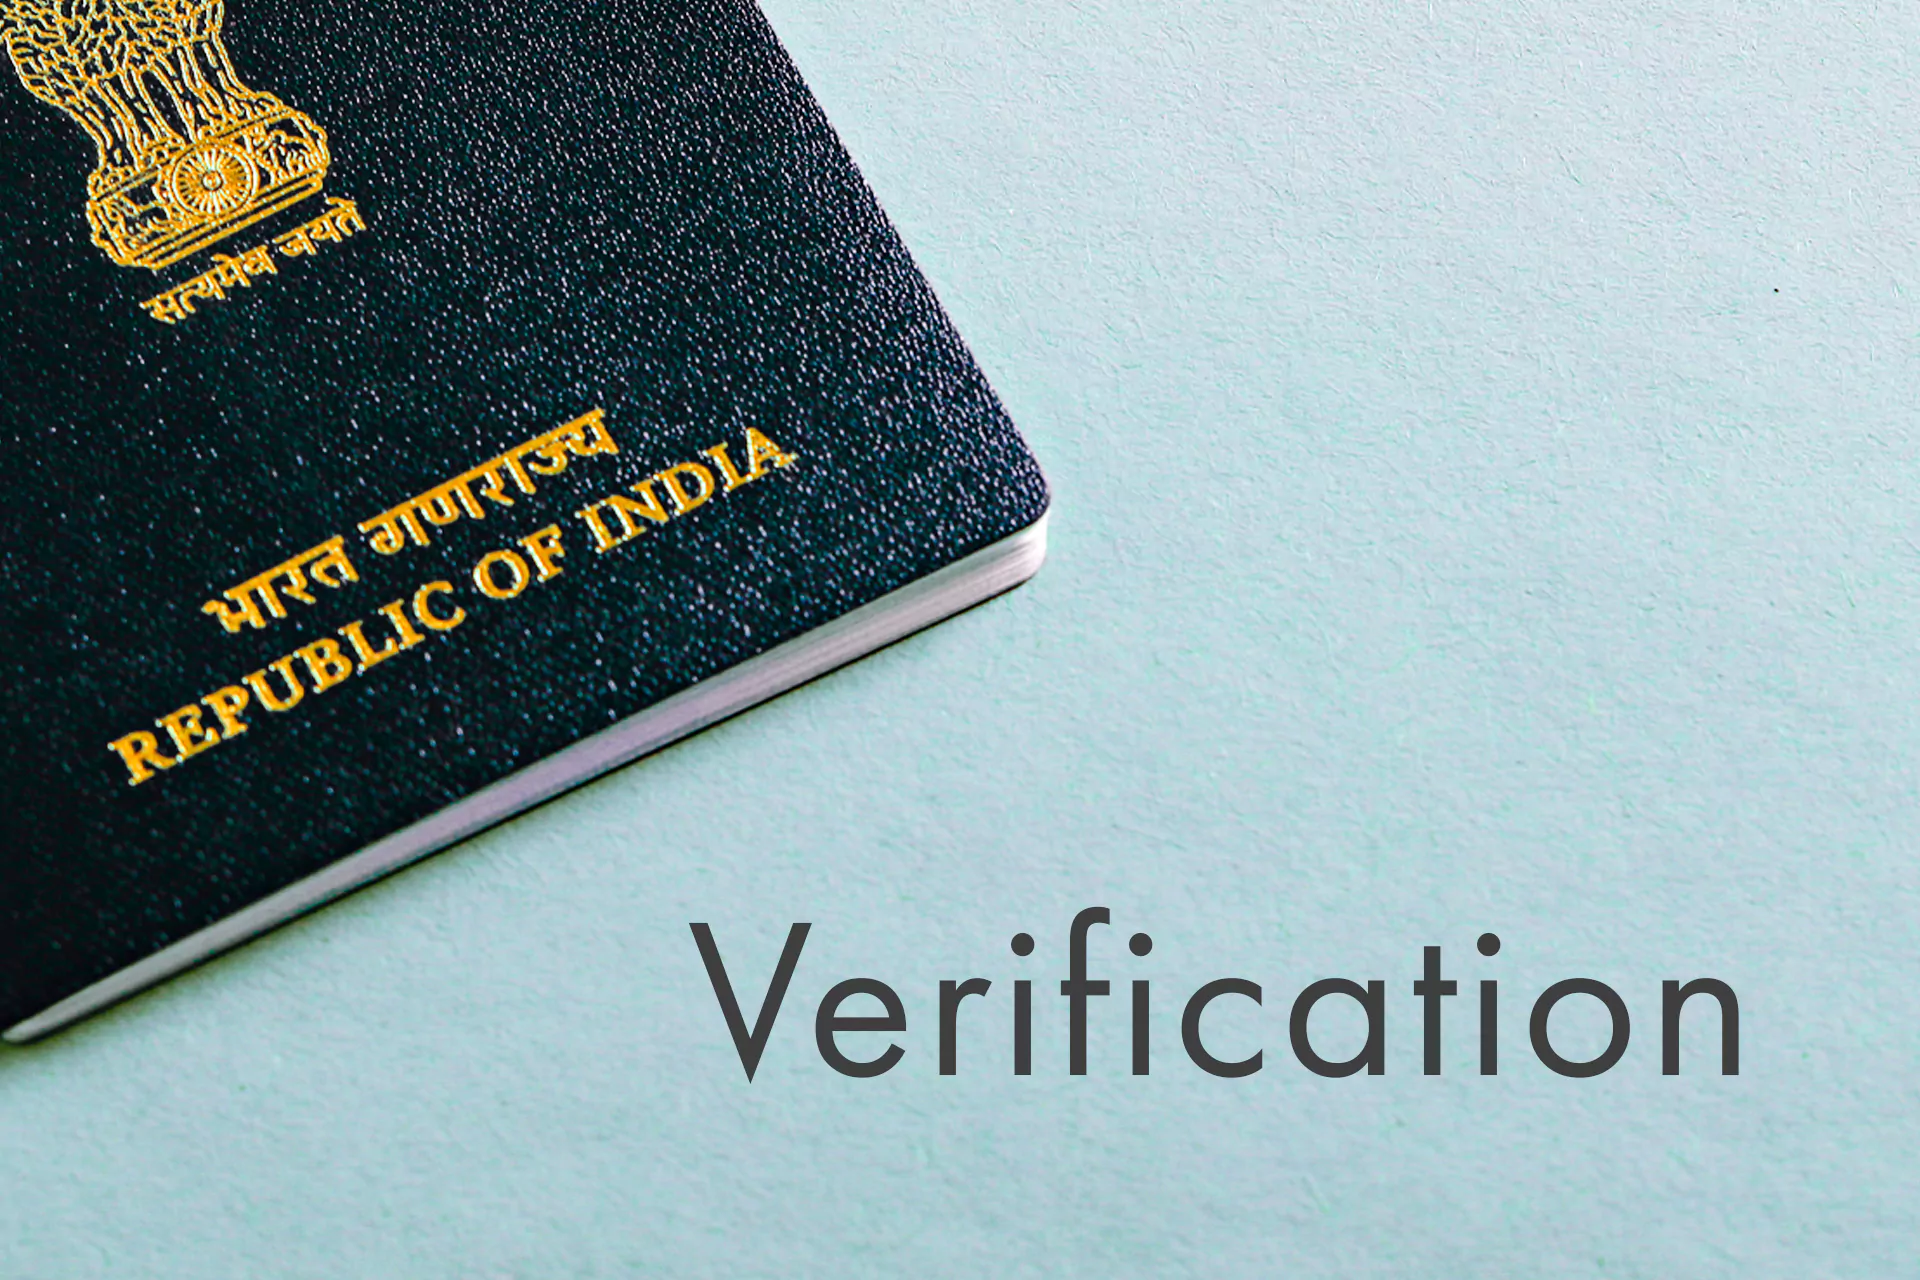 To verify your account you need to upload scans of your real documents.